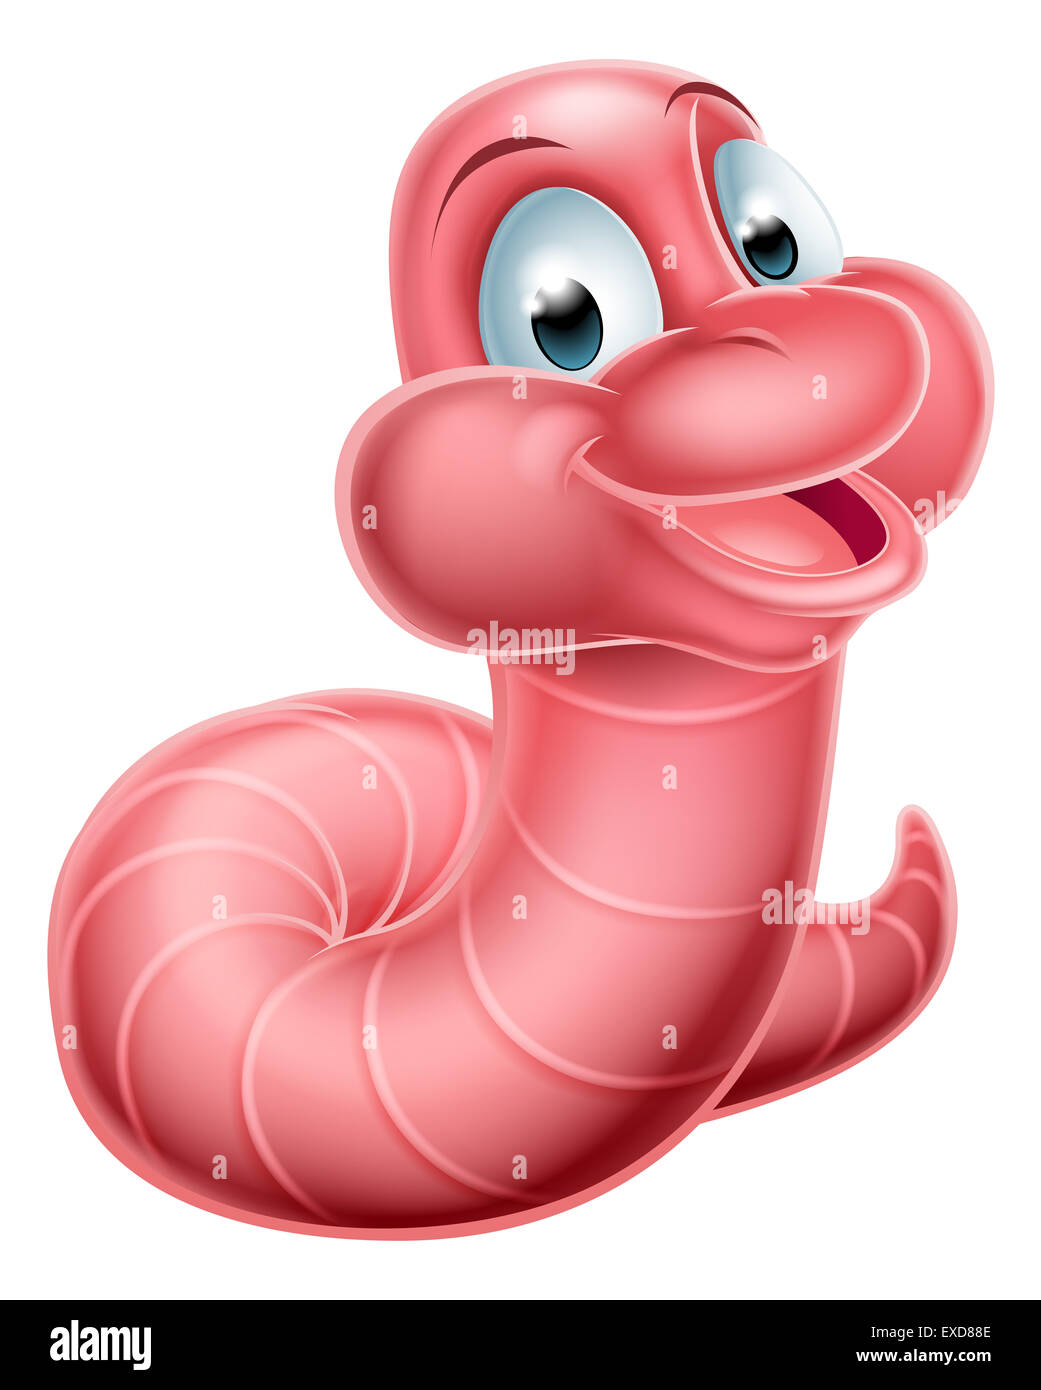 An illustration of a happy cute pink cartoon caterpillar worm or